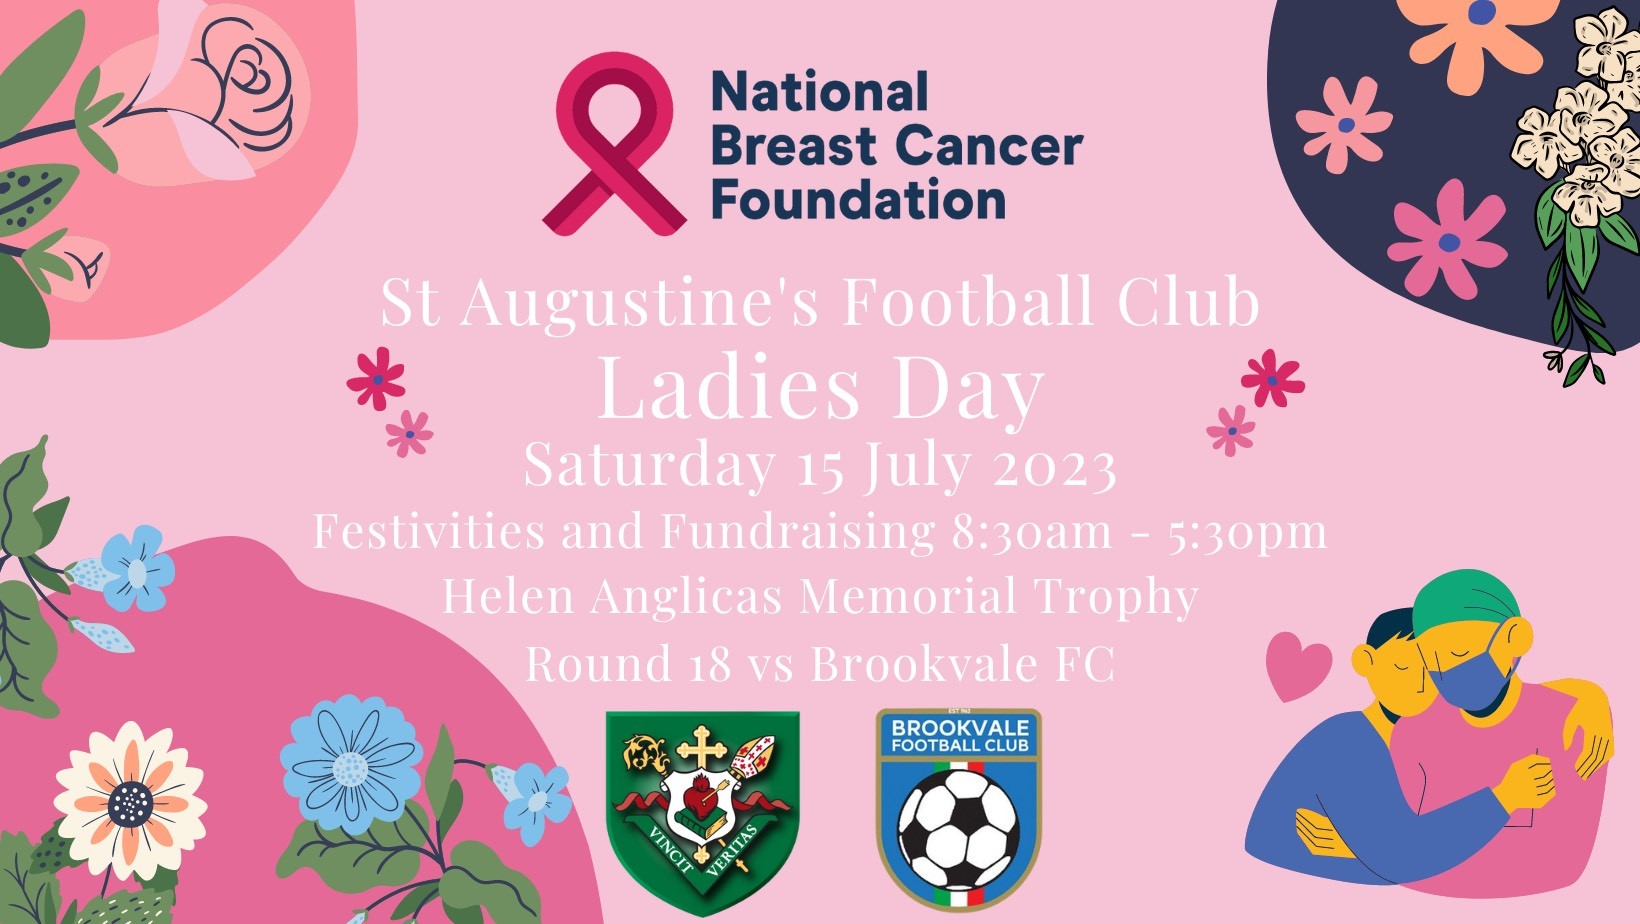 On Saturday 15 July, the St Augustine's Ladies Day will be held at Cromer Park. All money raised on the day will be donated to the National Breast Cancer Foundation, who fund leading edge breast cancer research.